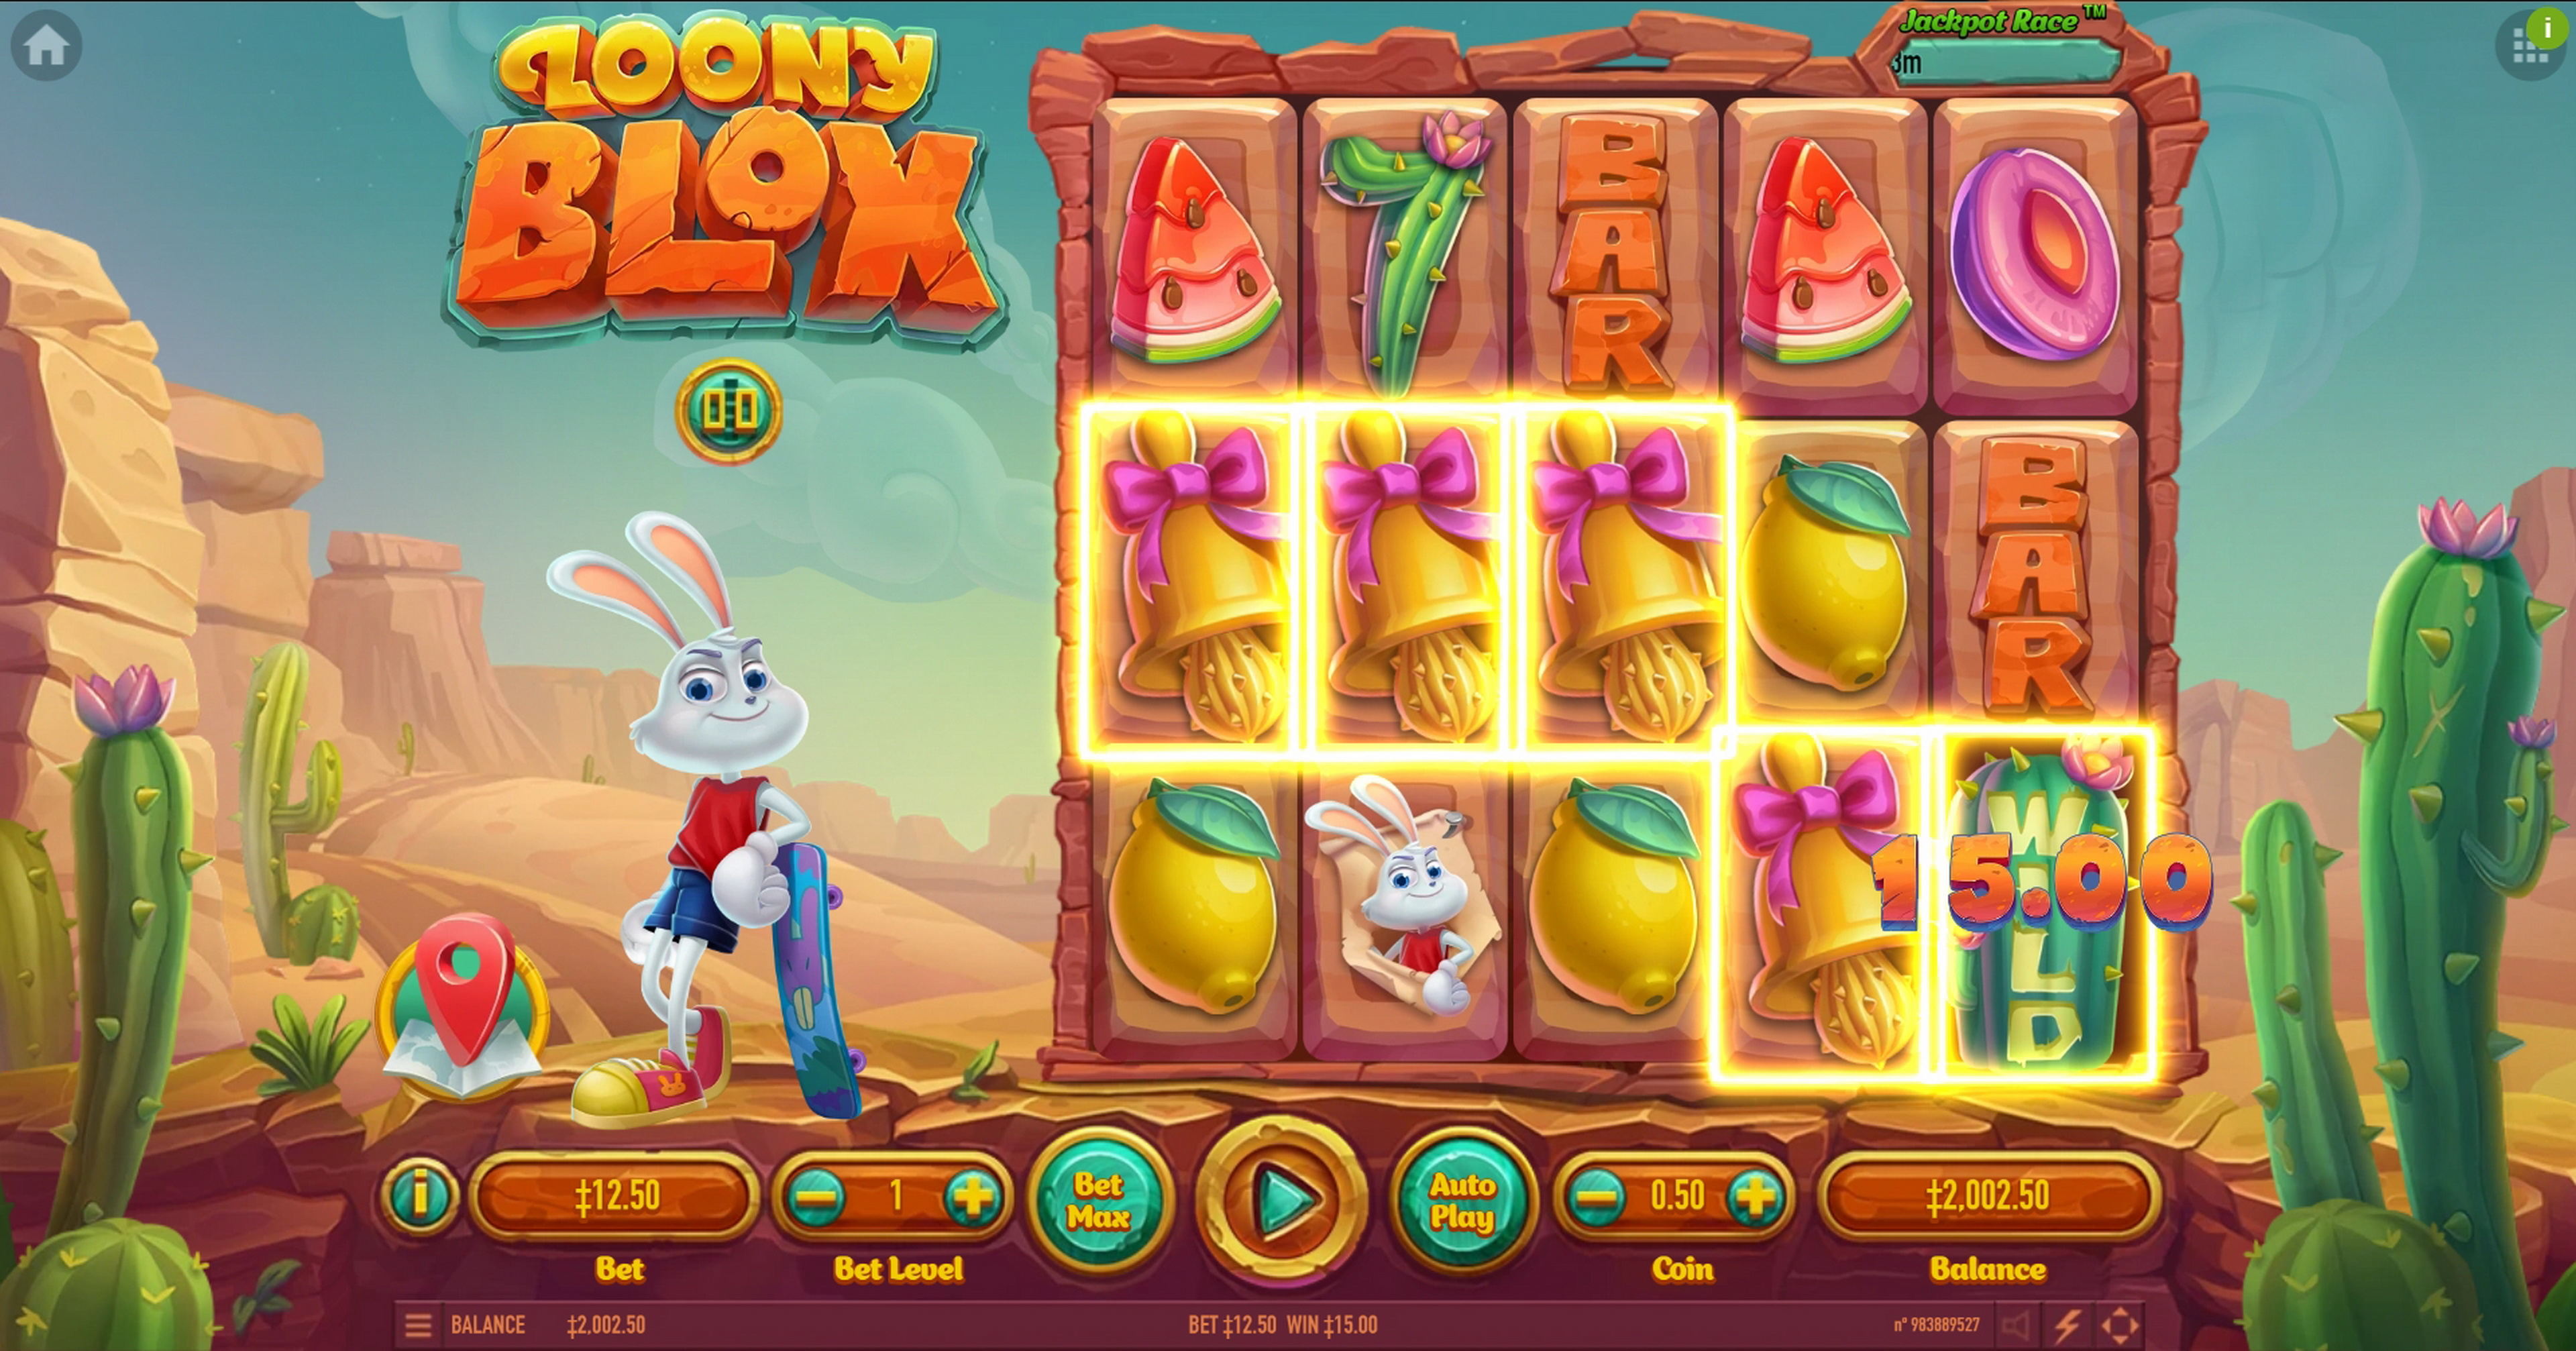 Win Money in Loony Blox Free Slot Game by Habanero